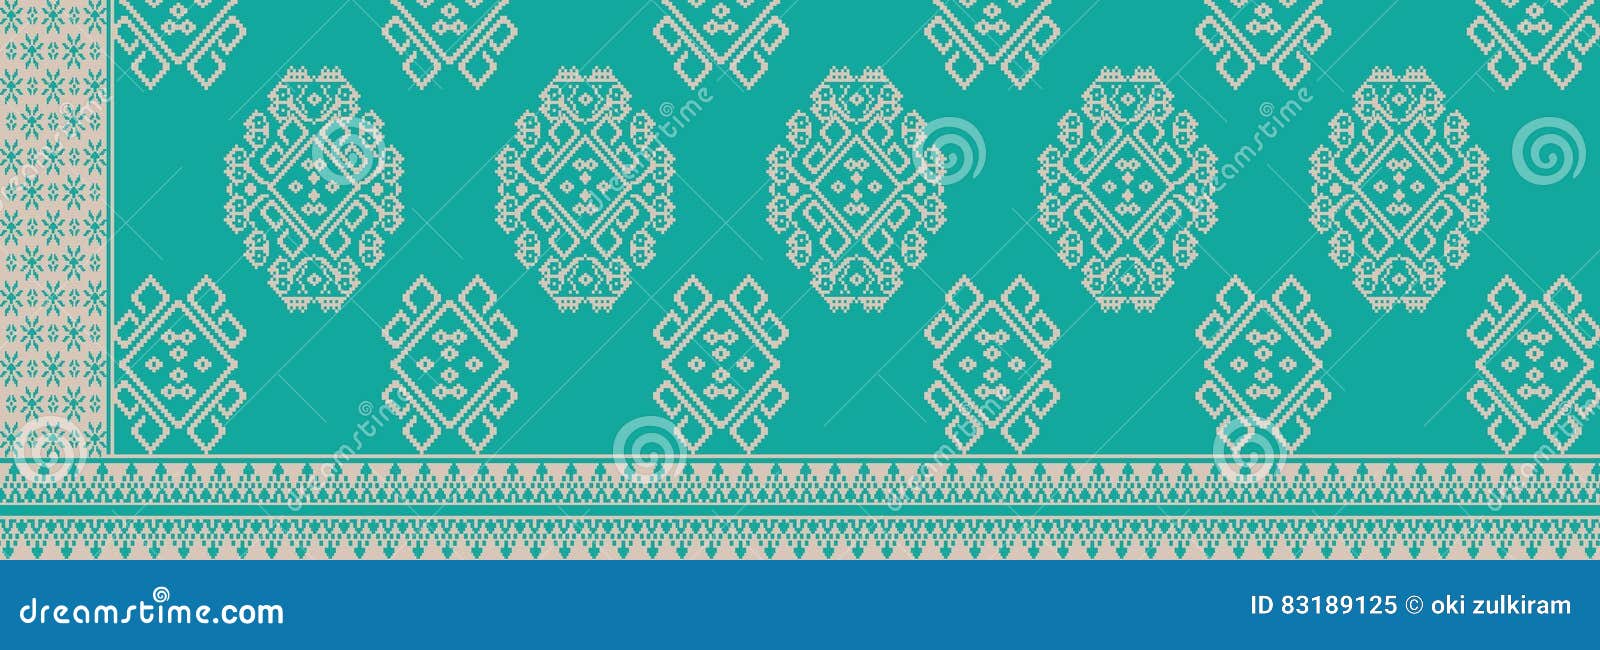 Batik from Indonesia stock vector. Illustration of textile - 83189125